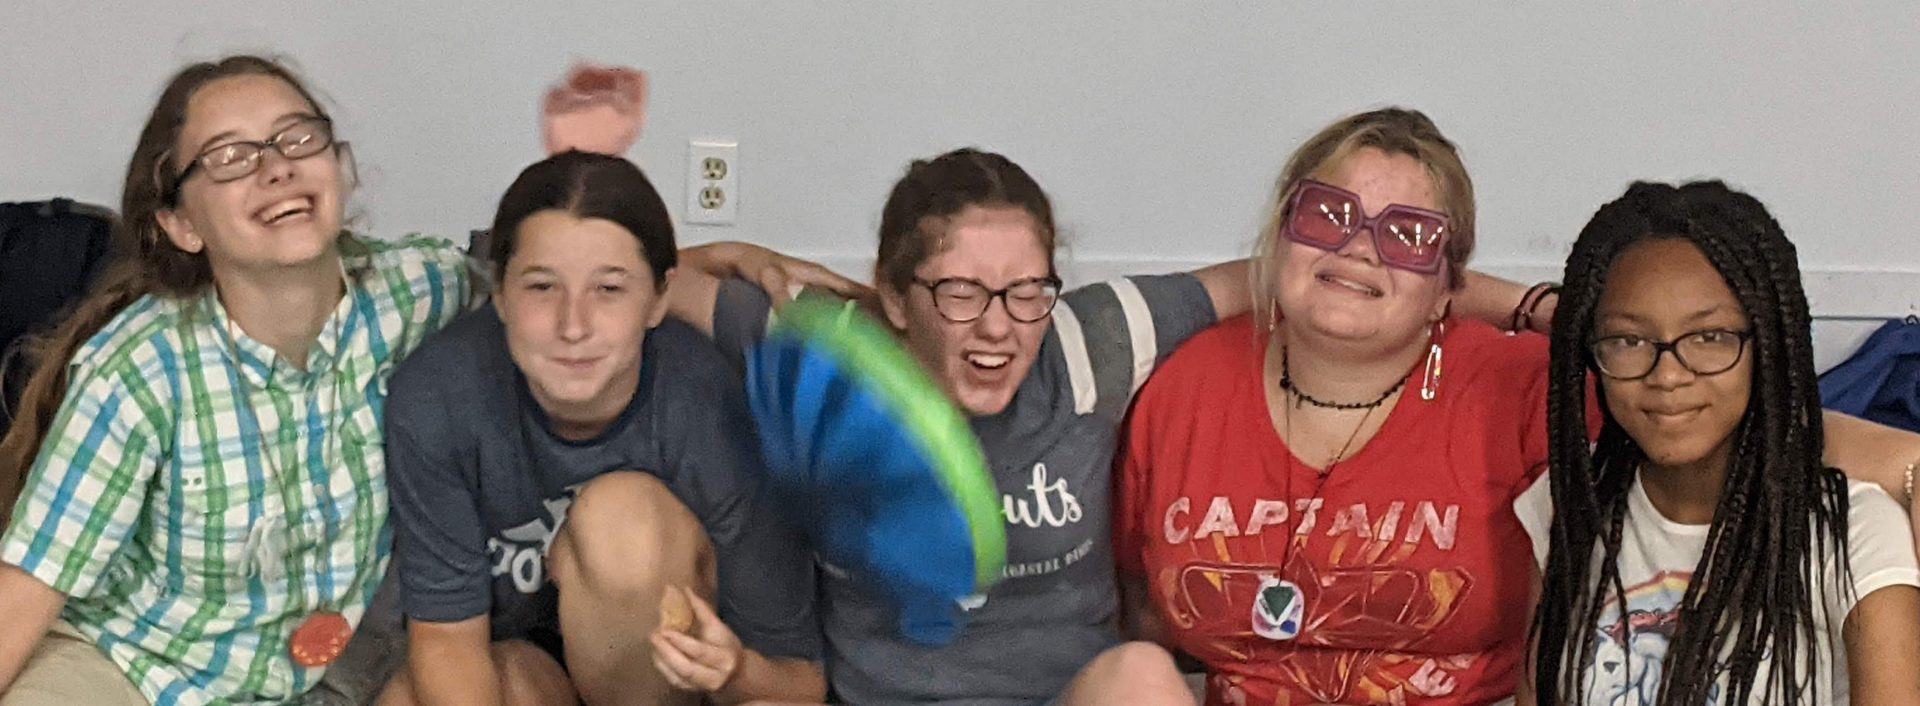  Girls sitting on a couch laughing. 